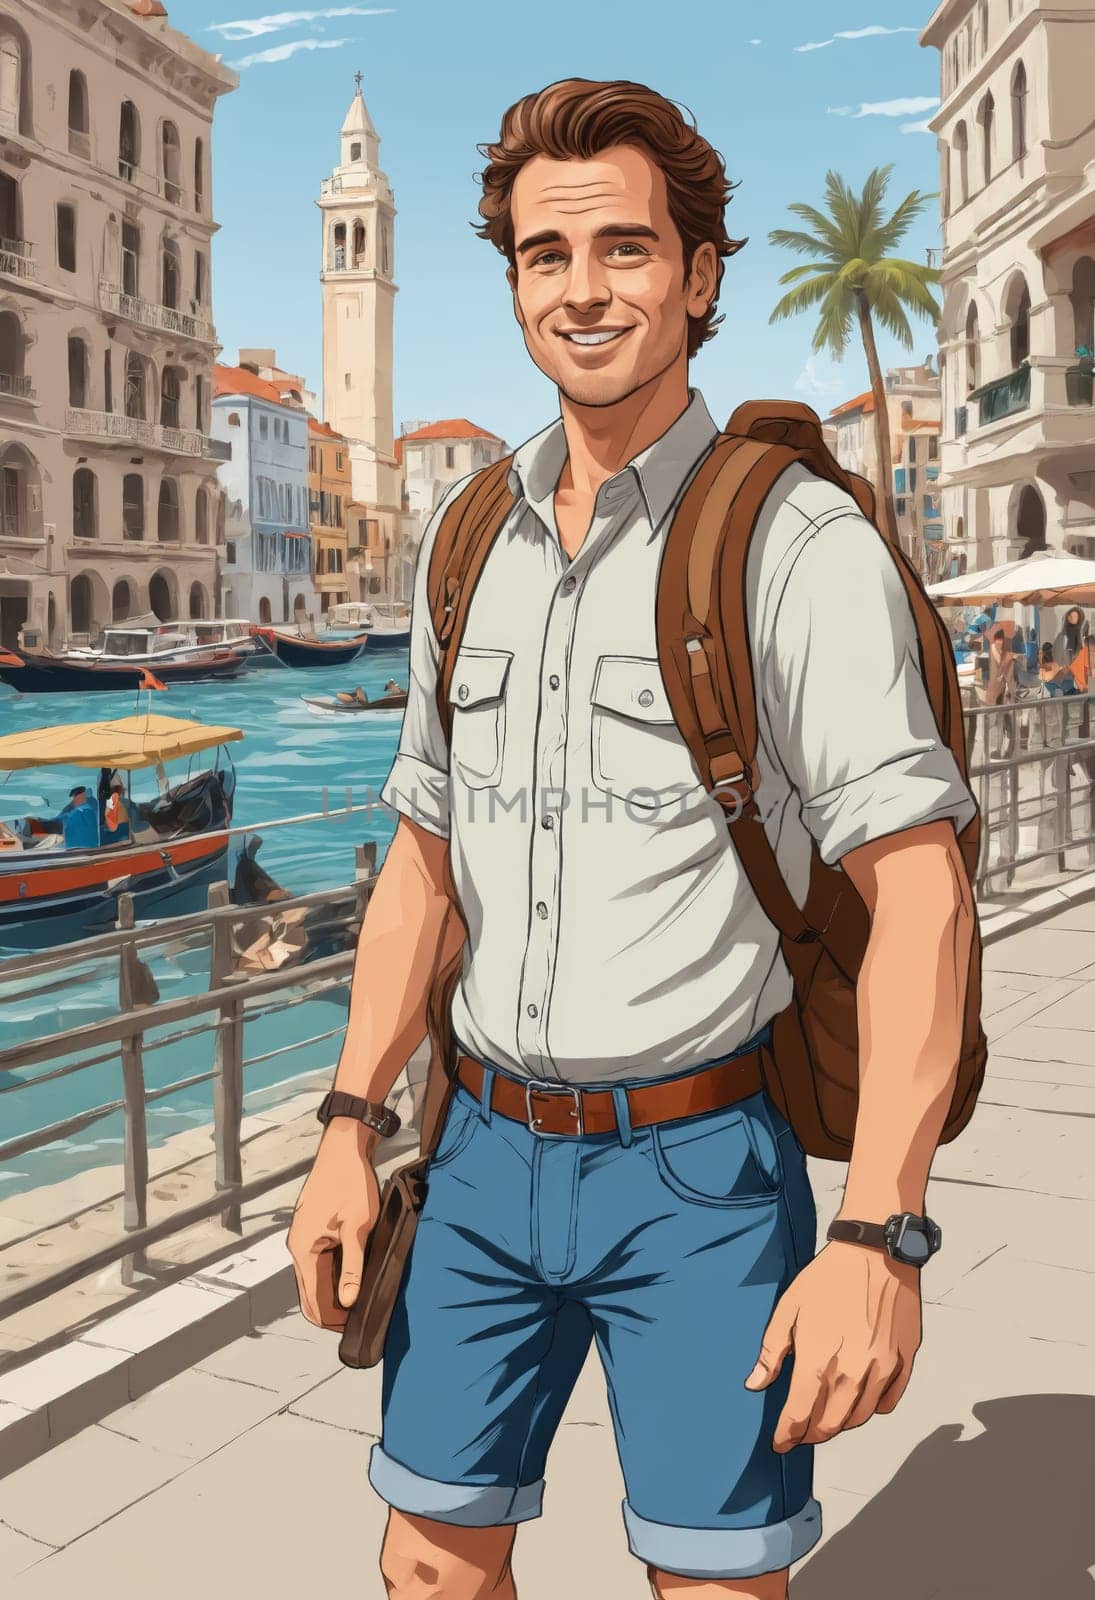 Vibrant comic-style depiction of a traveler geared up to discover the mysteries of a Colosseum-like setting.